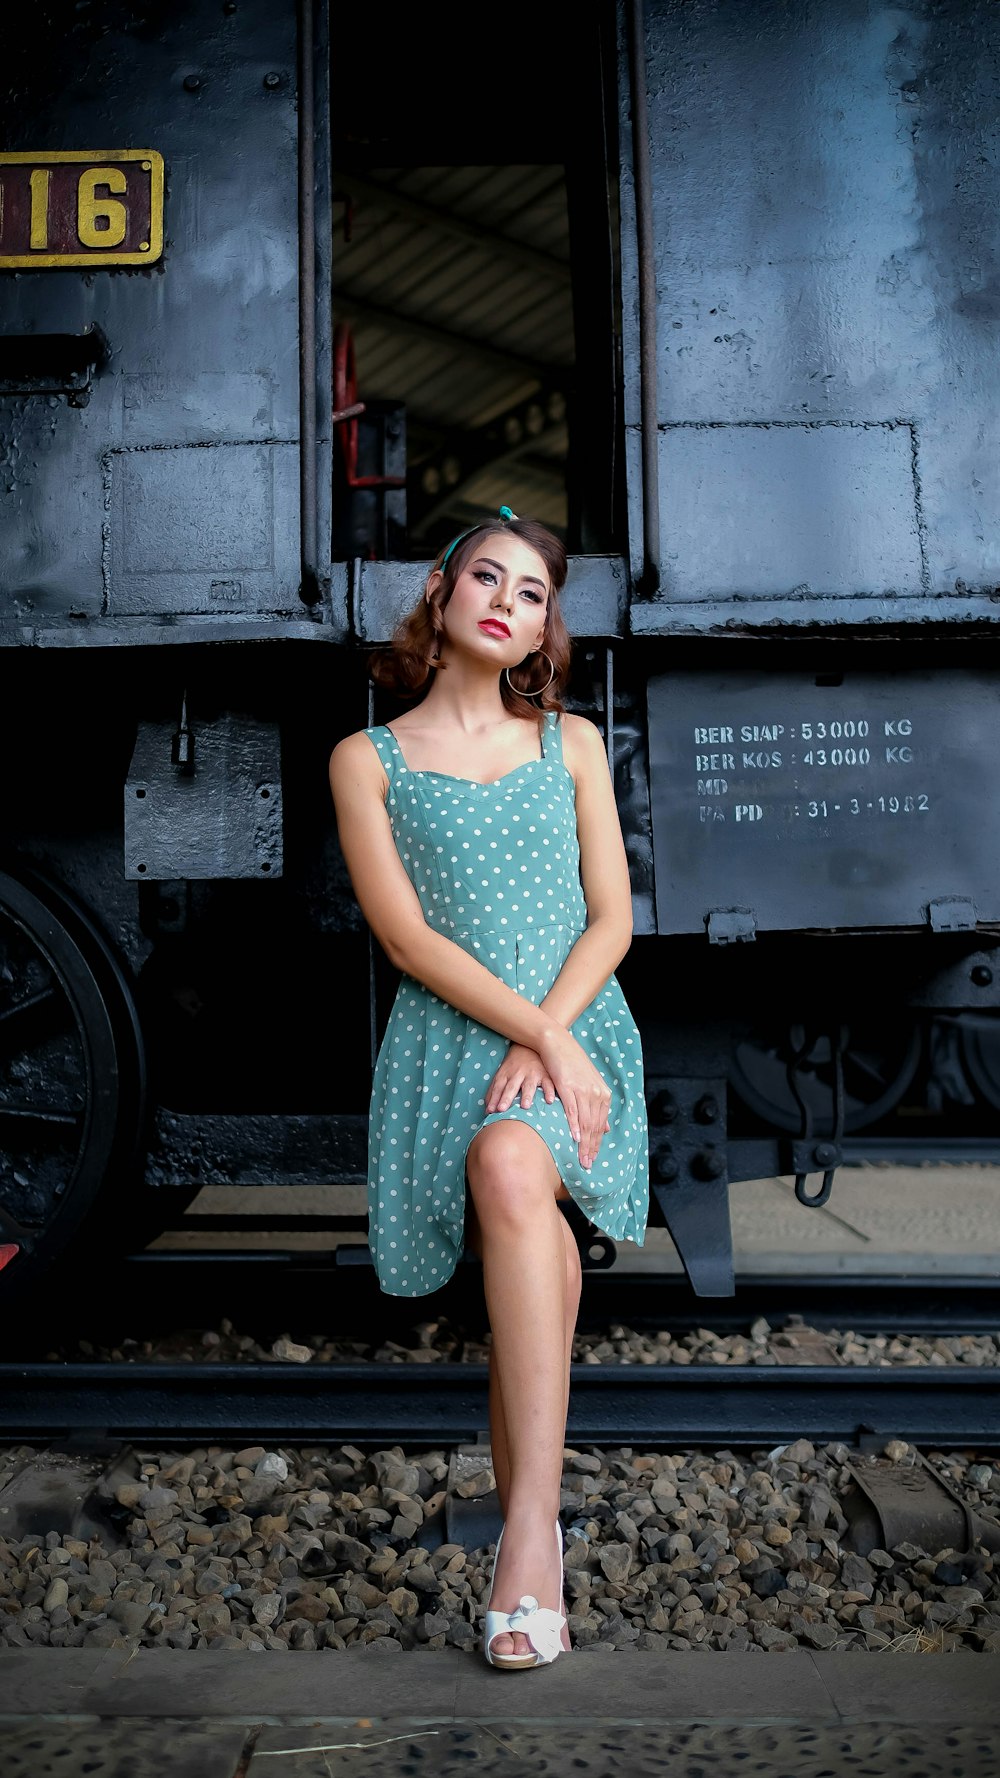 woman sitting on train posing for photoshoot